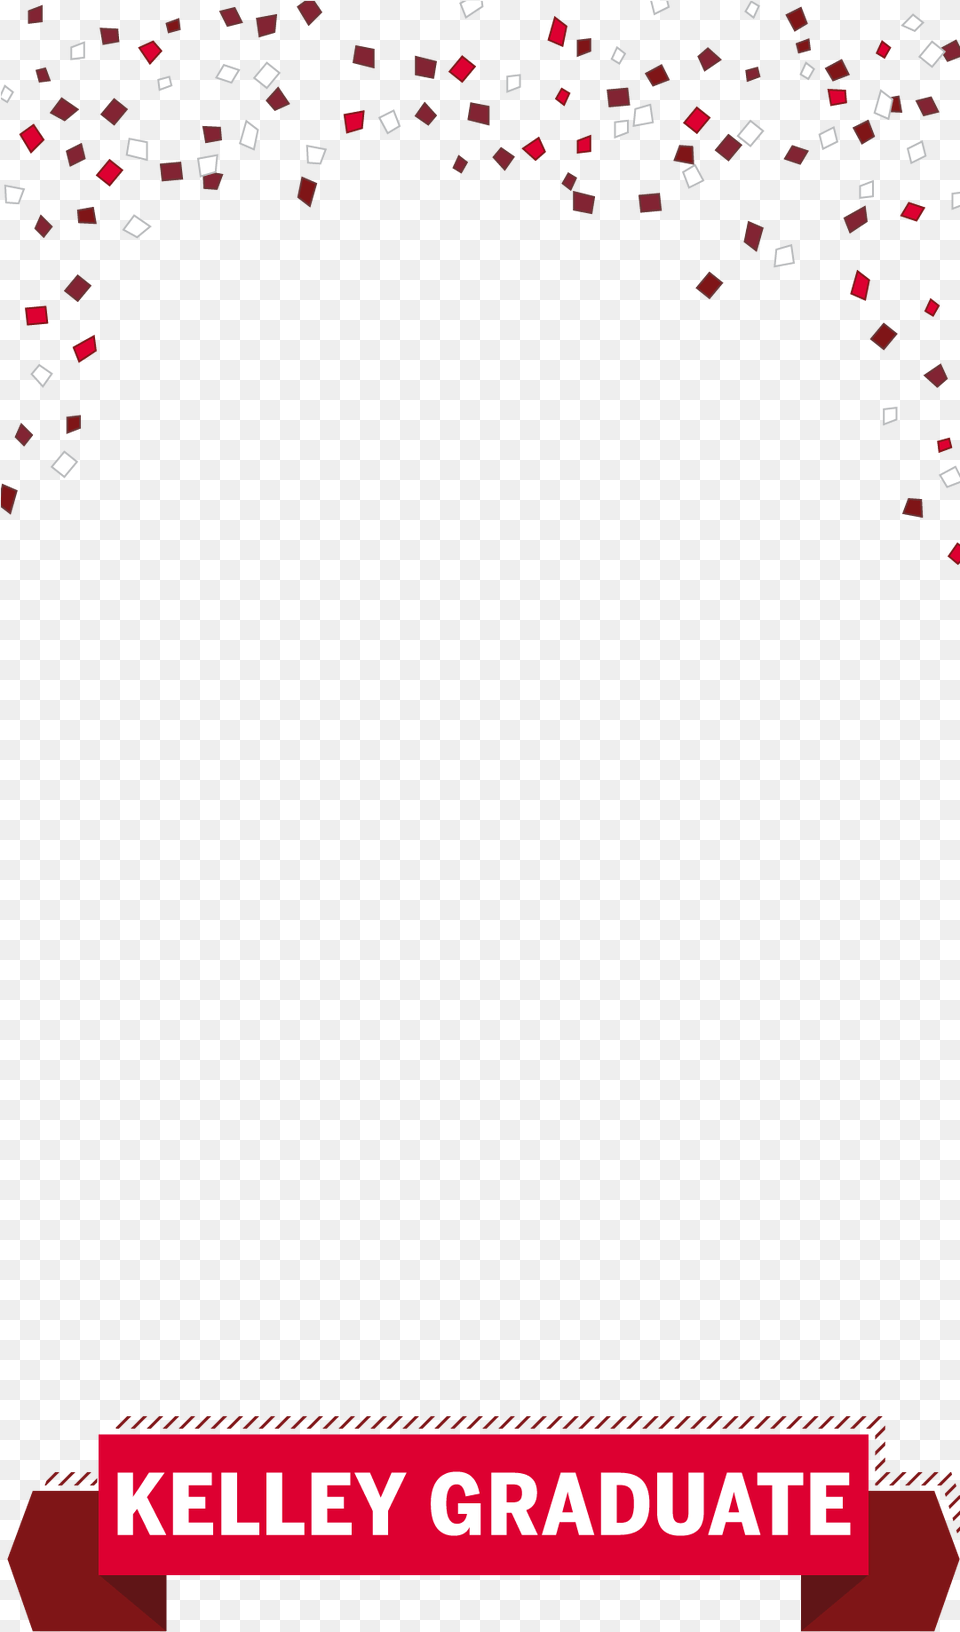 Snapchat Geofilter Graduation, Paper, Confetti, Fireworks Free Png Download